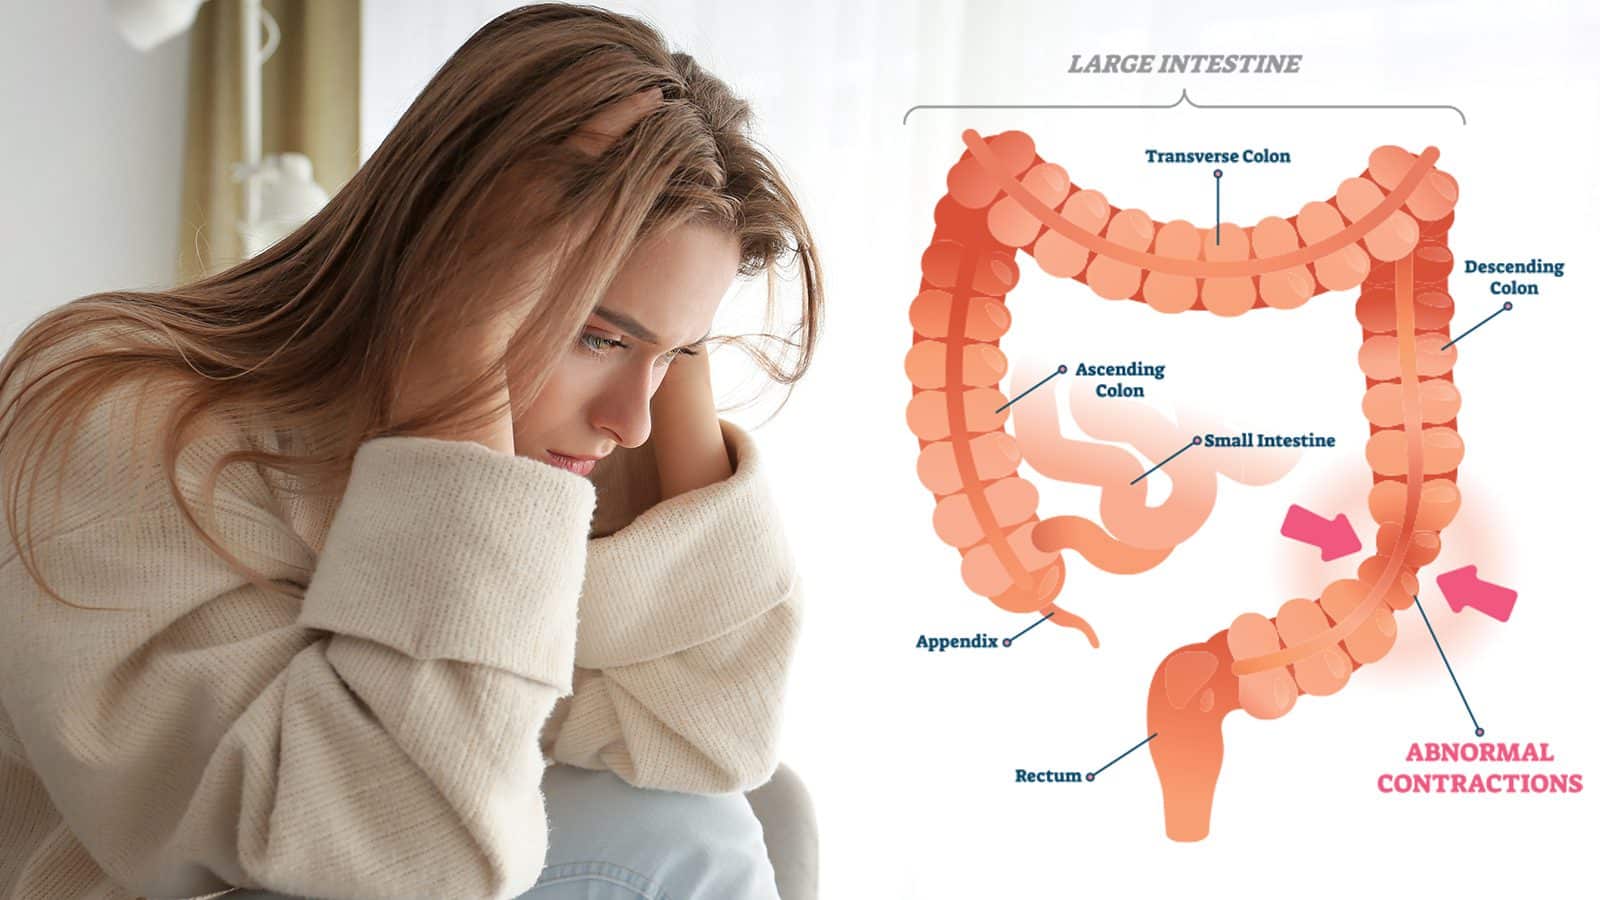 Researchers Find Link Between IBS and Depression